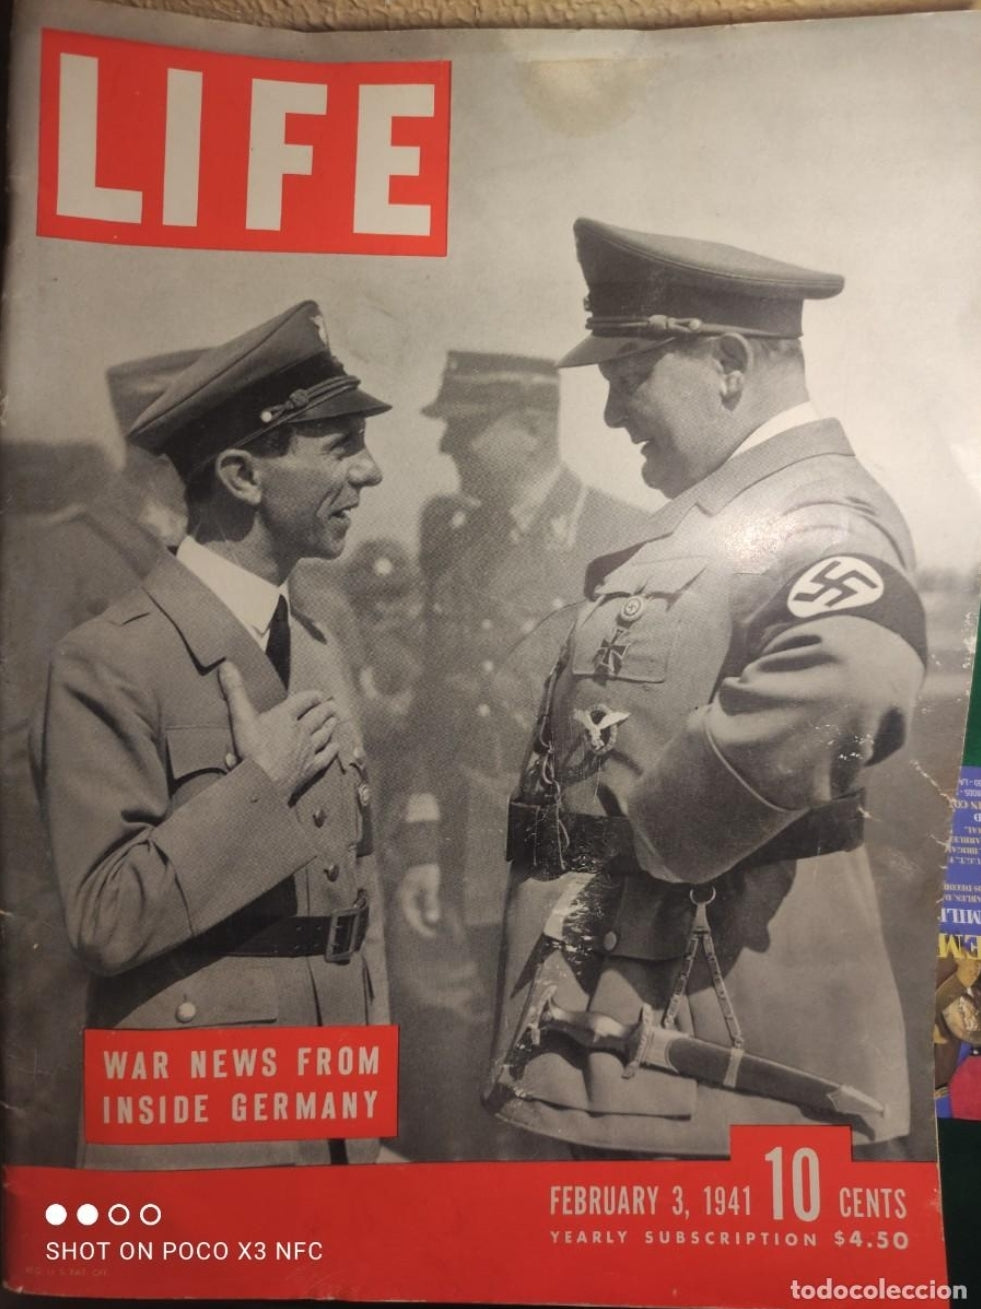 Life Magazine with Göring and Goebbels